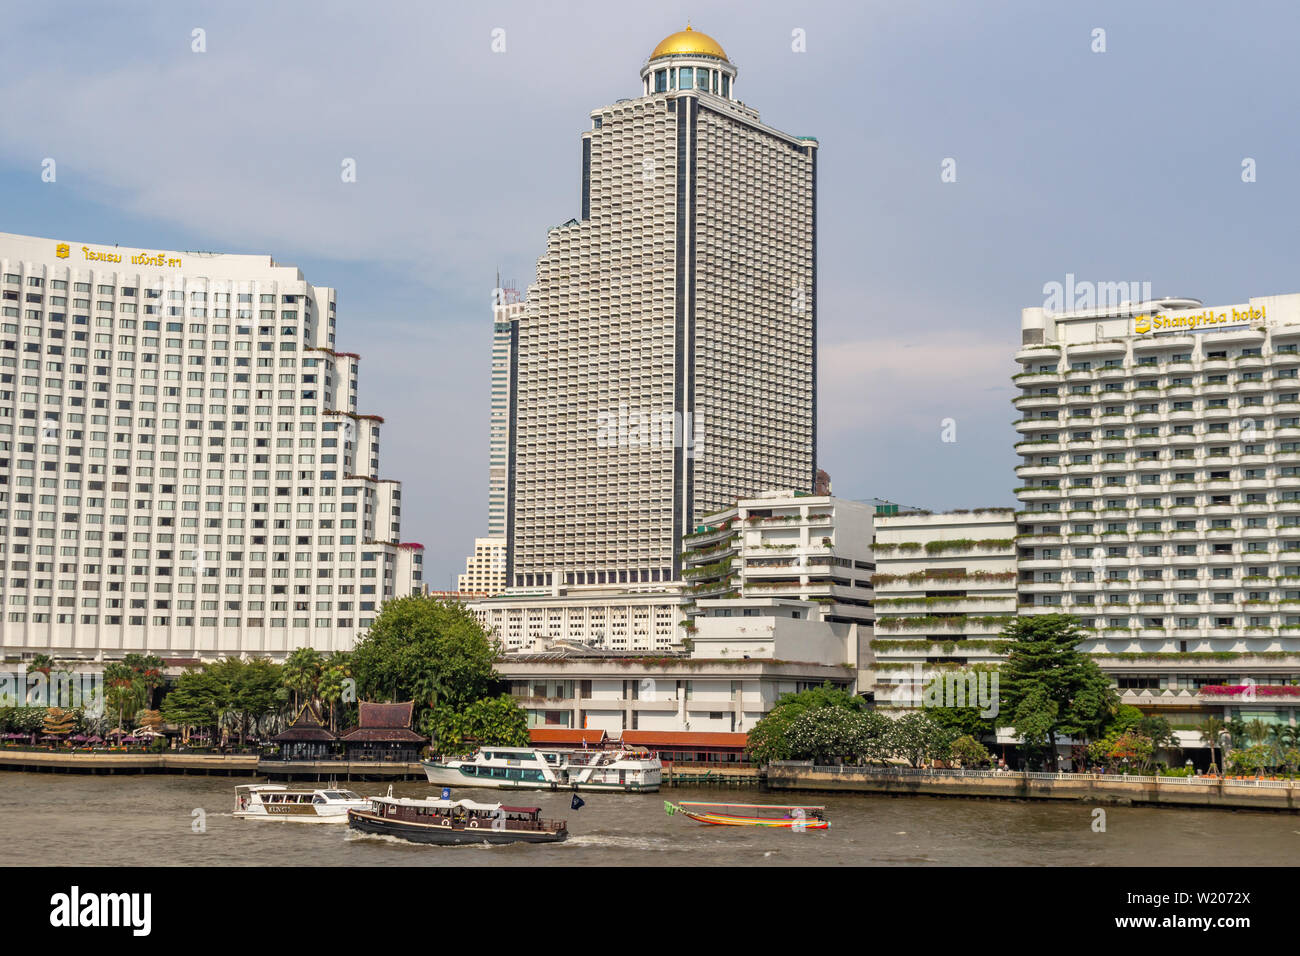 Bangkok, Thailand - April 14, 2019: State tower skyscraper seen from the Chao Praya river Stock Photo